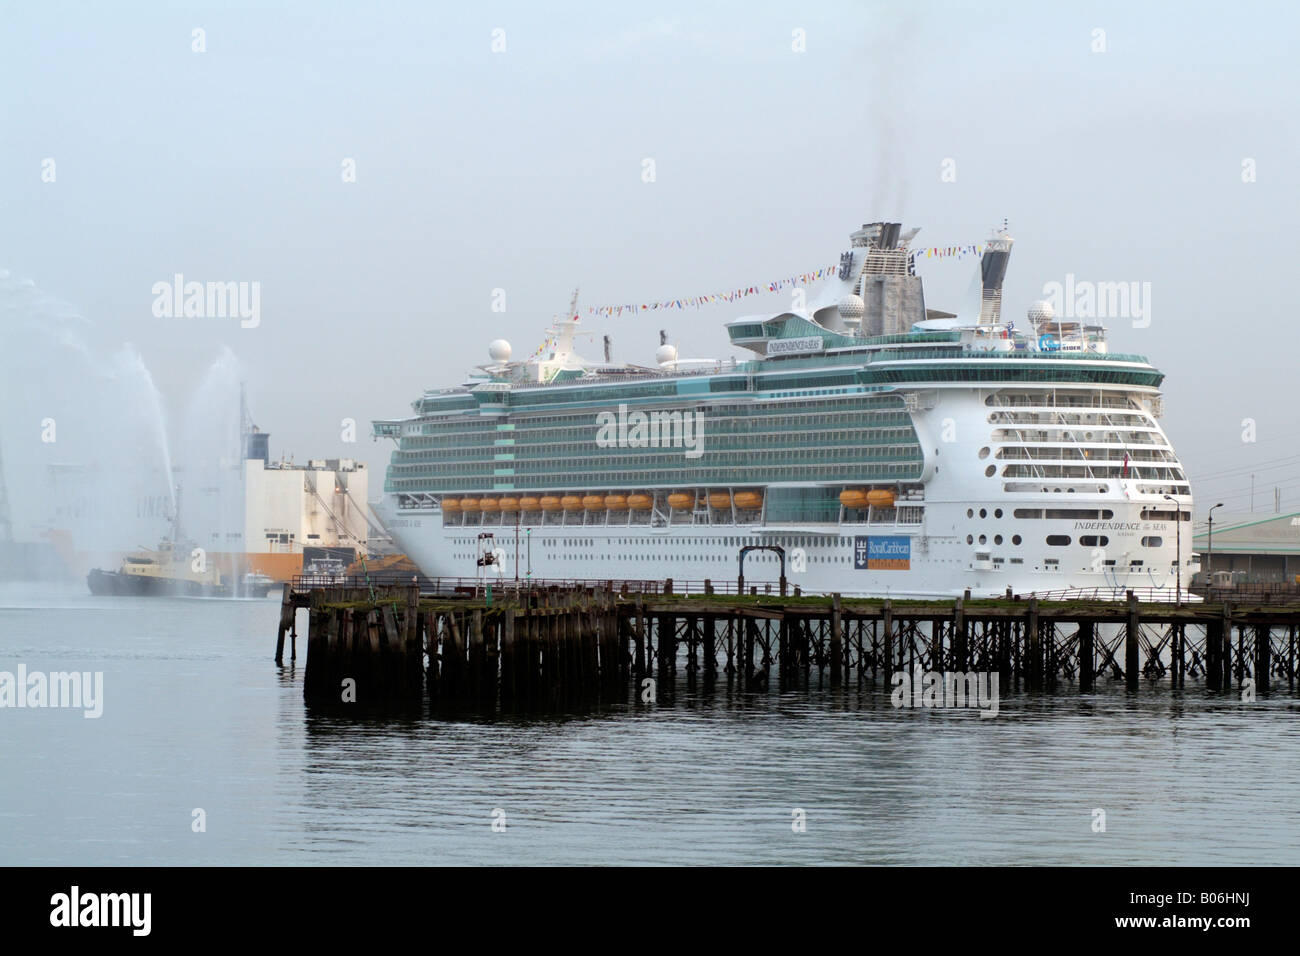 Independence of the Seas cruise ship docked in the Port of Southampton England UK Stock Photo